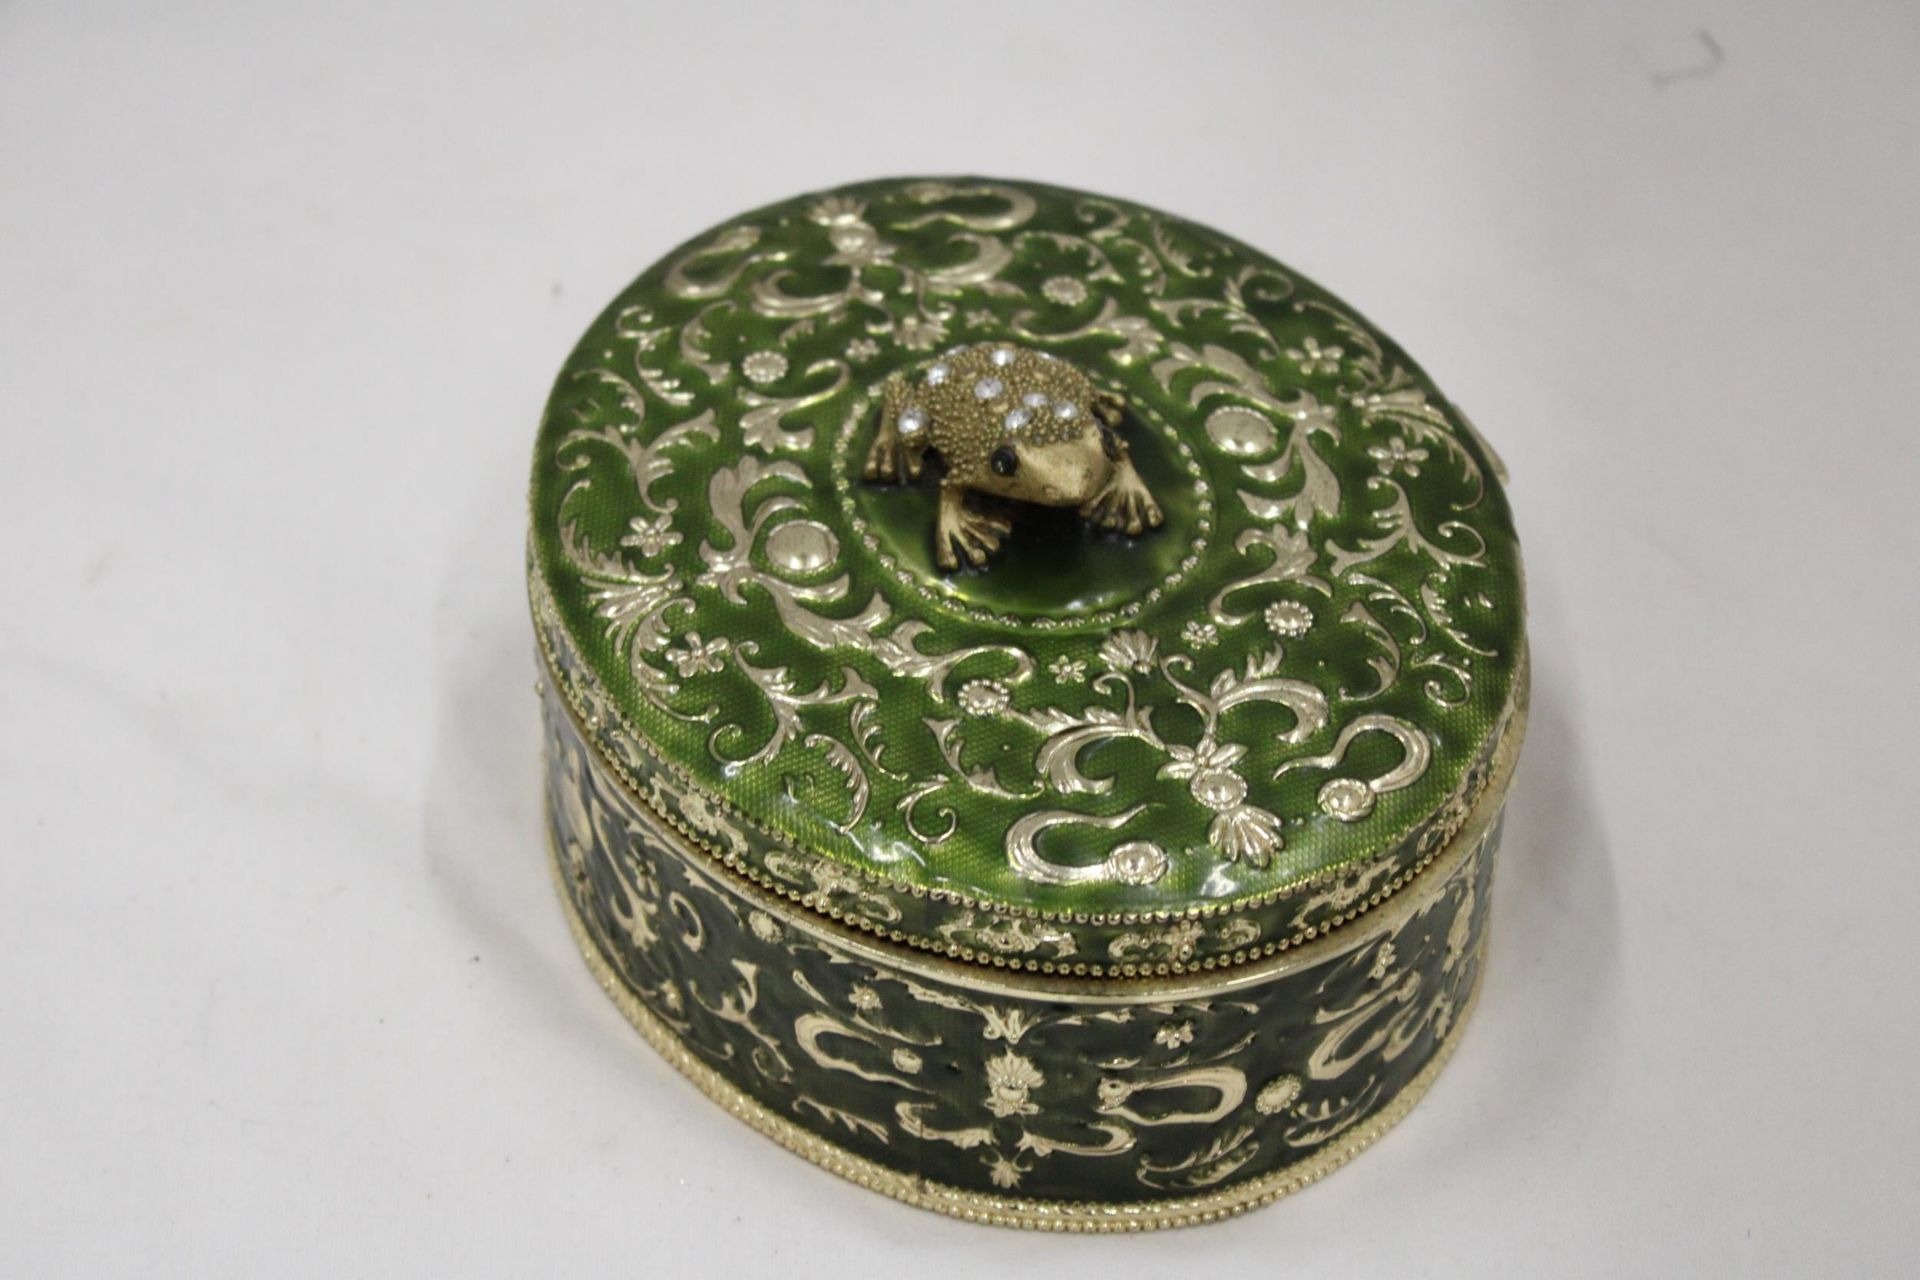 A GREEN ENAMELLED KEEPSAKE/JEWELLERY BOX WITH A JEWELLED FRONG ON THE LID, HEIGHT 8CM, DIAMETER,